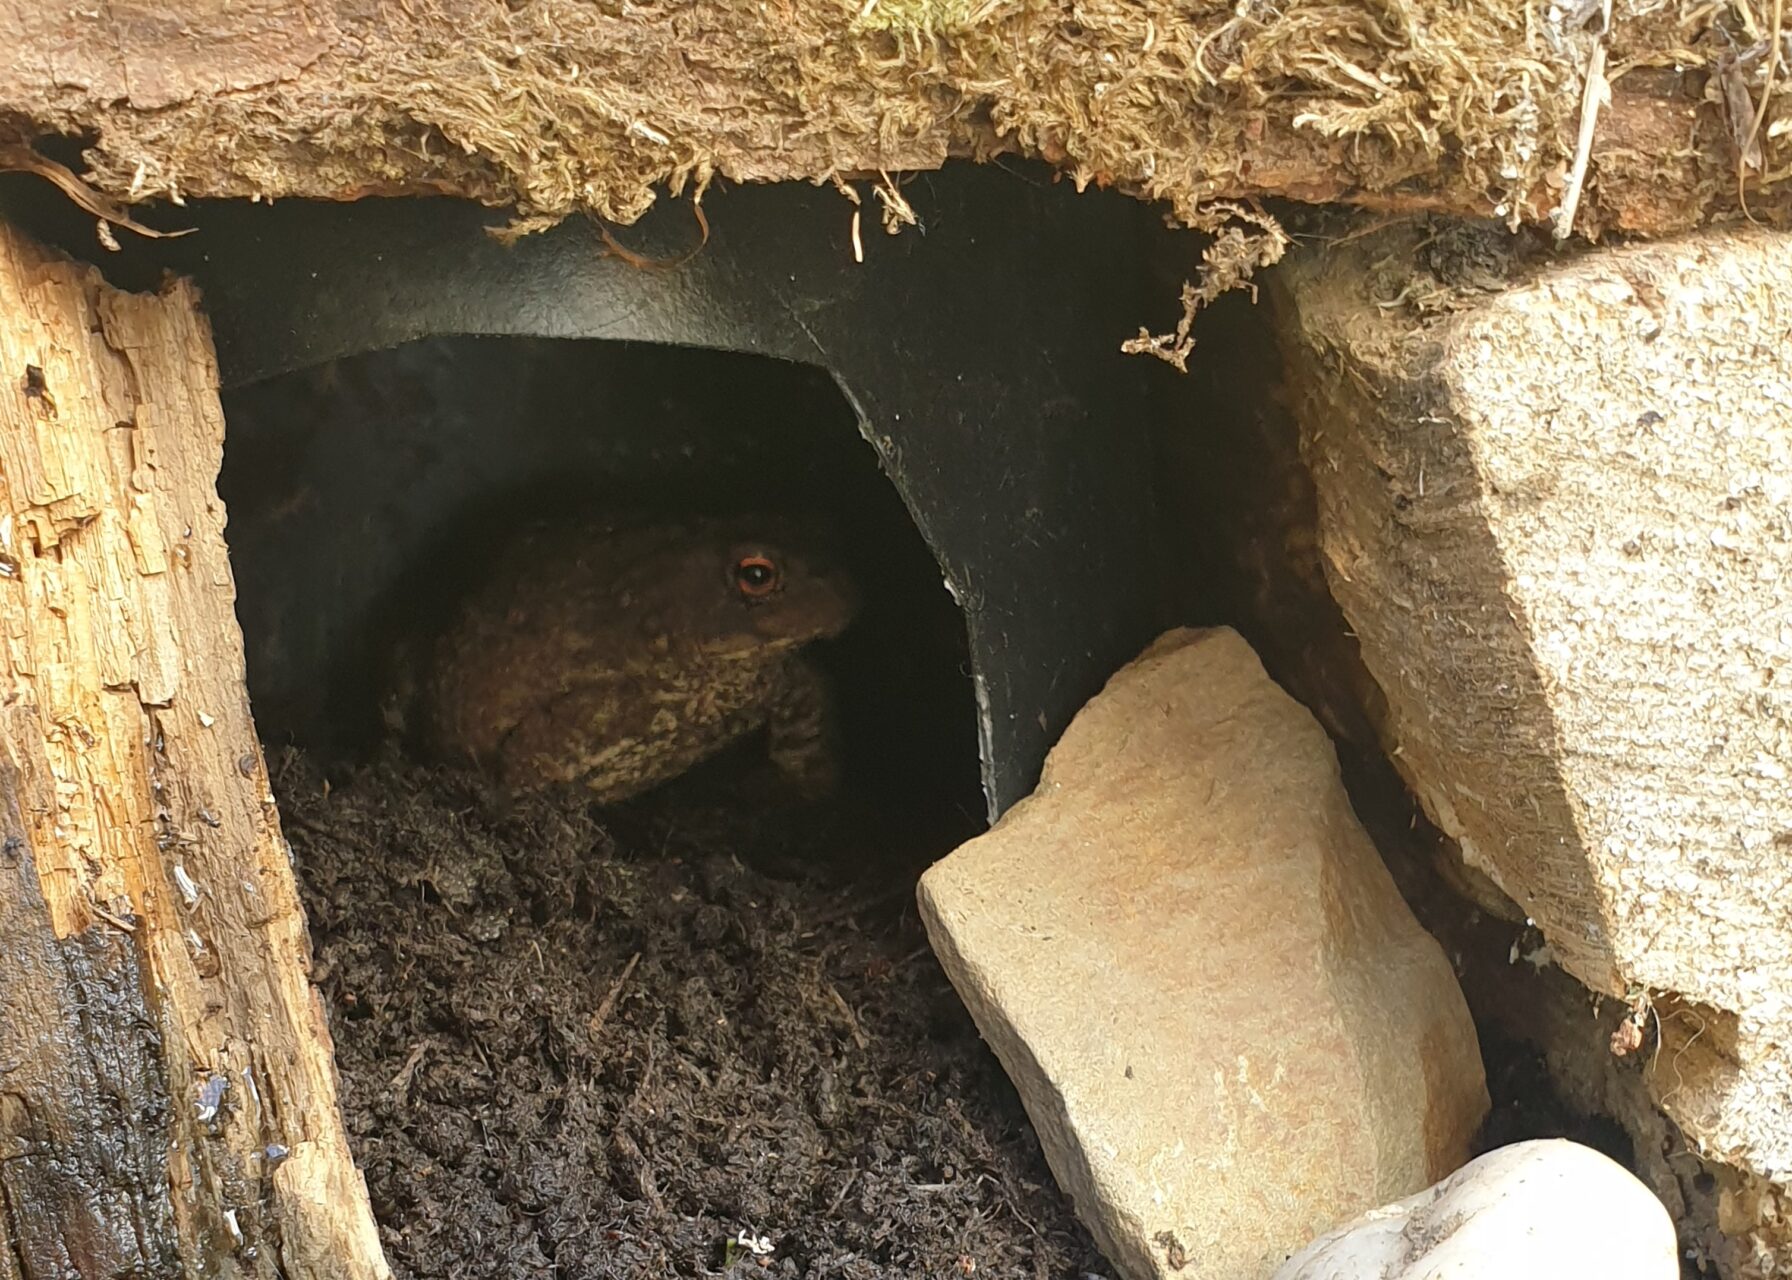 How to make a toad house